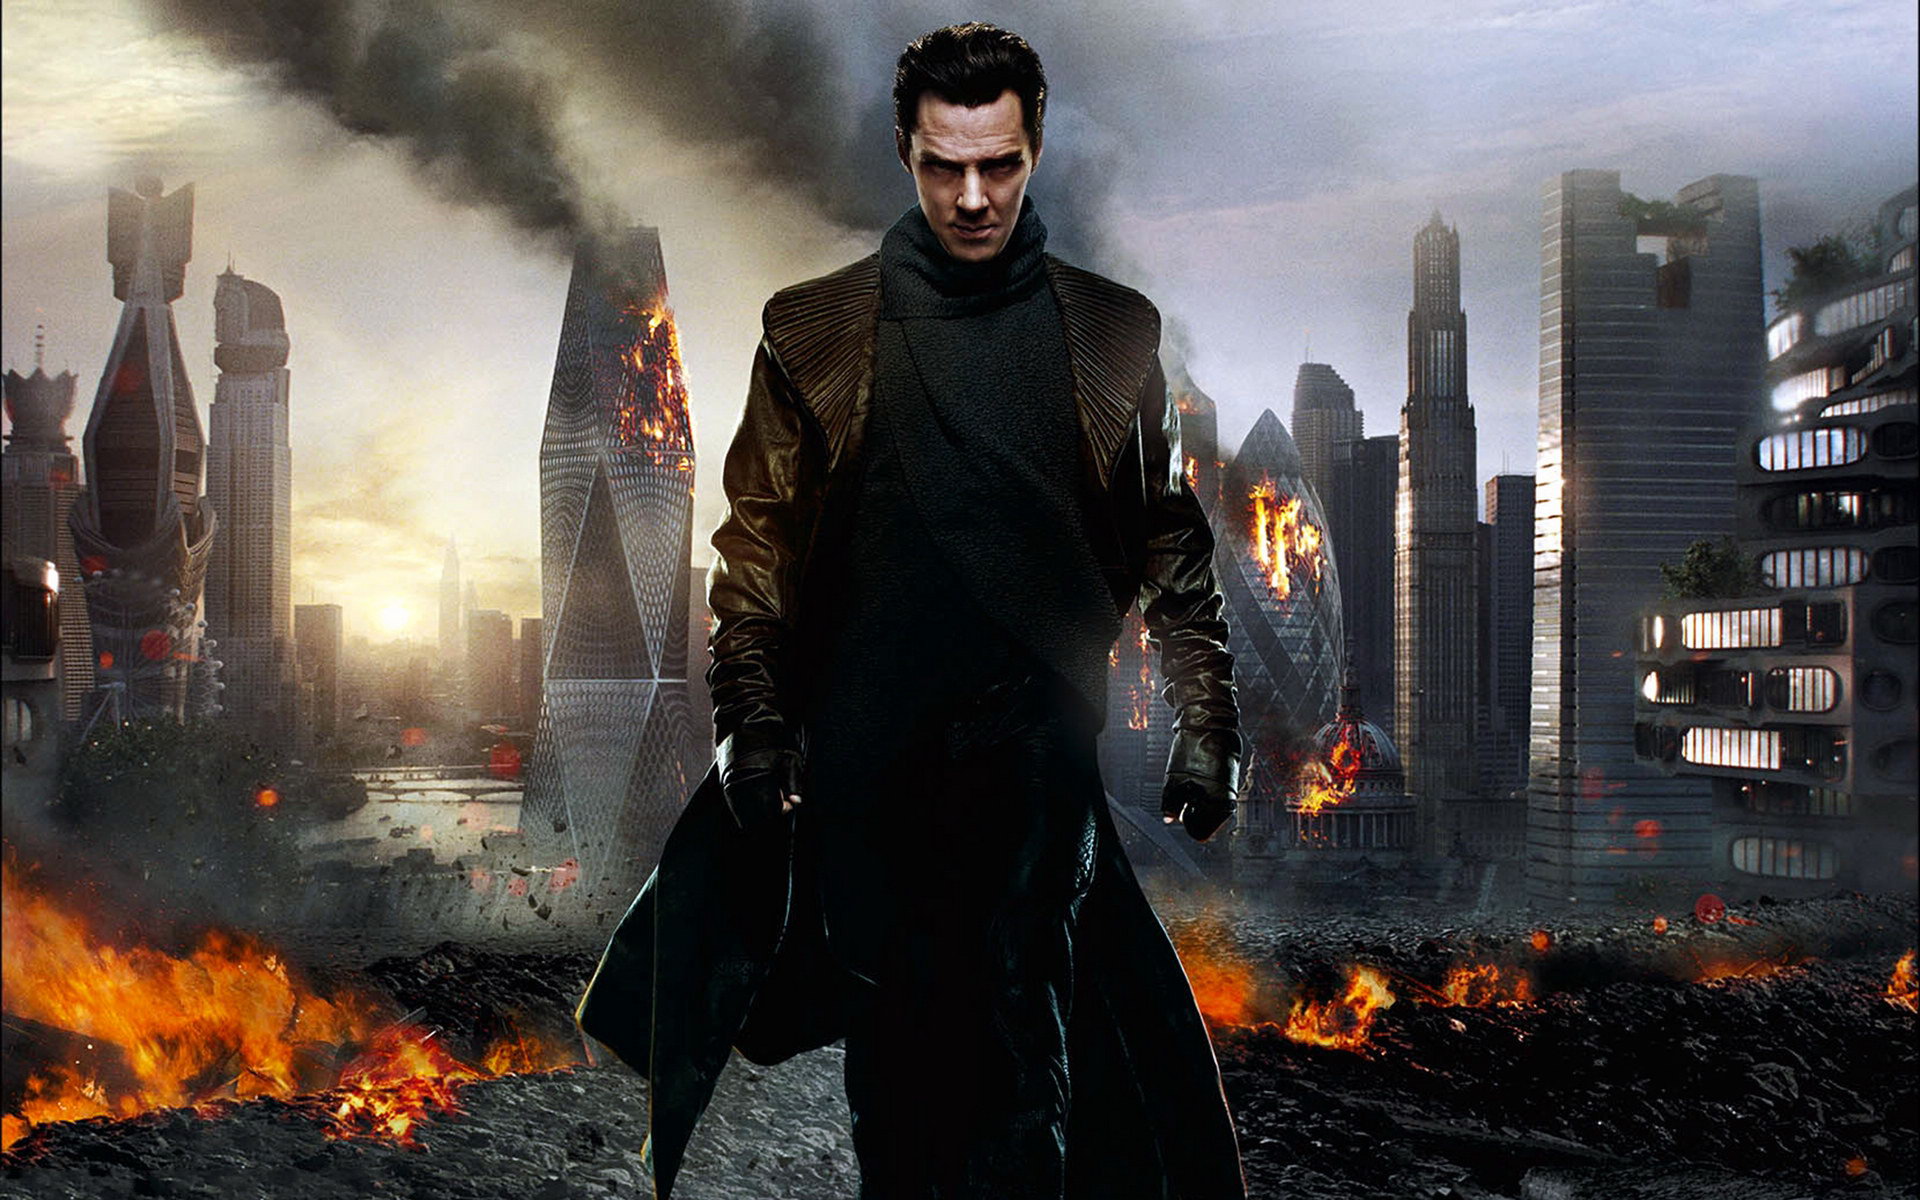 Star Trek Into Darkness Backgrounds, Compatible - PC, Mobile, Gadgets| 1920x1200 px